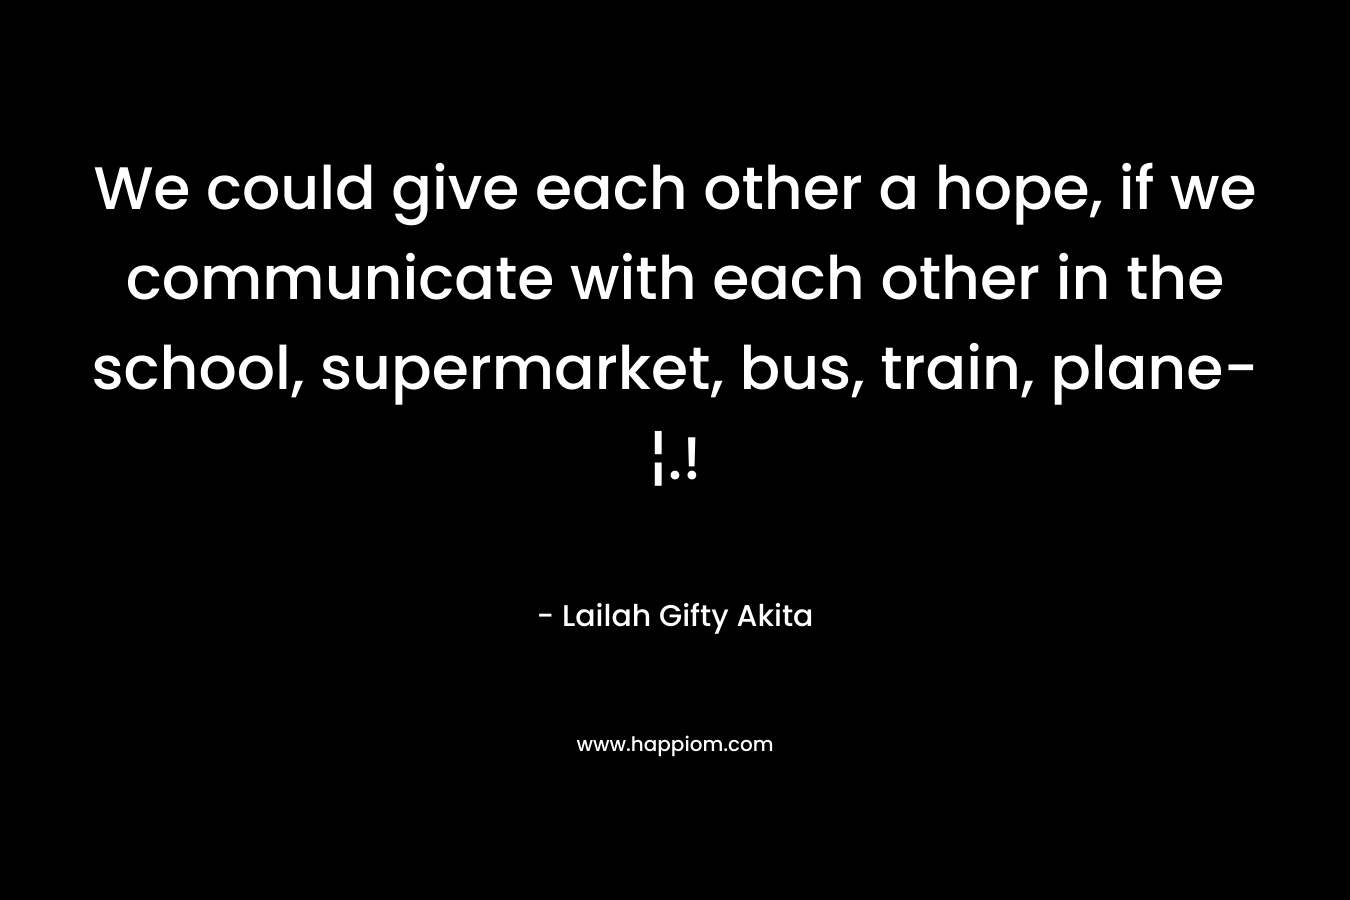 We could give each other a hope, if we communicate with each other in the school, supermarket, bus, train, plane-¦.! – Lailah Gifty Akita